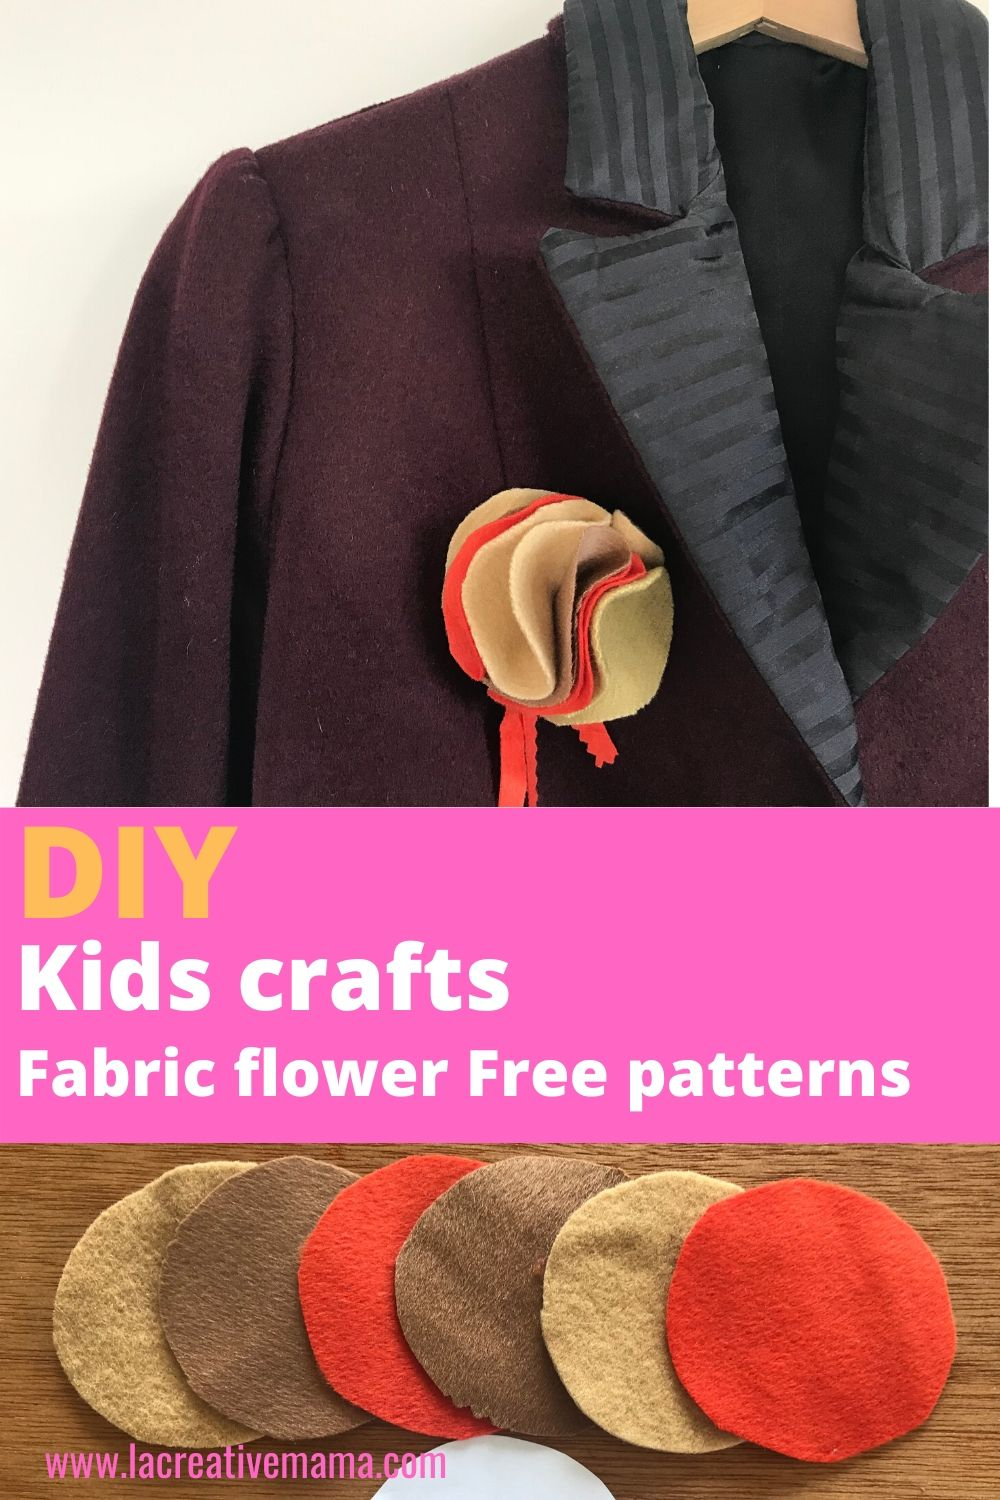 How to make a fast and easy fabric flower - La creative mama - How to make a fast and easy fabric flower - La creative mama -   23 fabric crafts for kids to make ideas